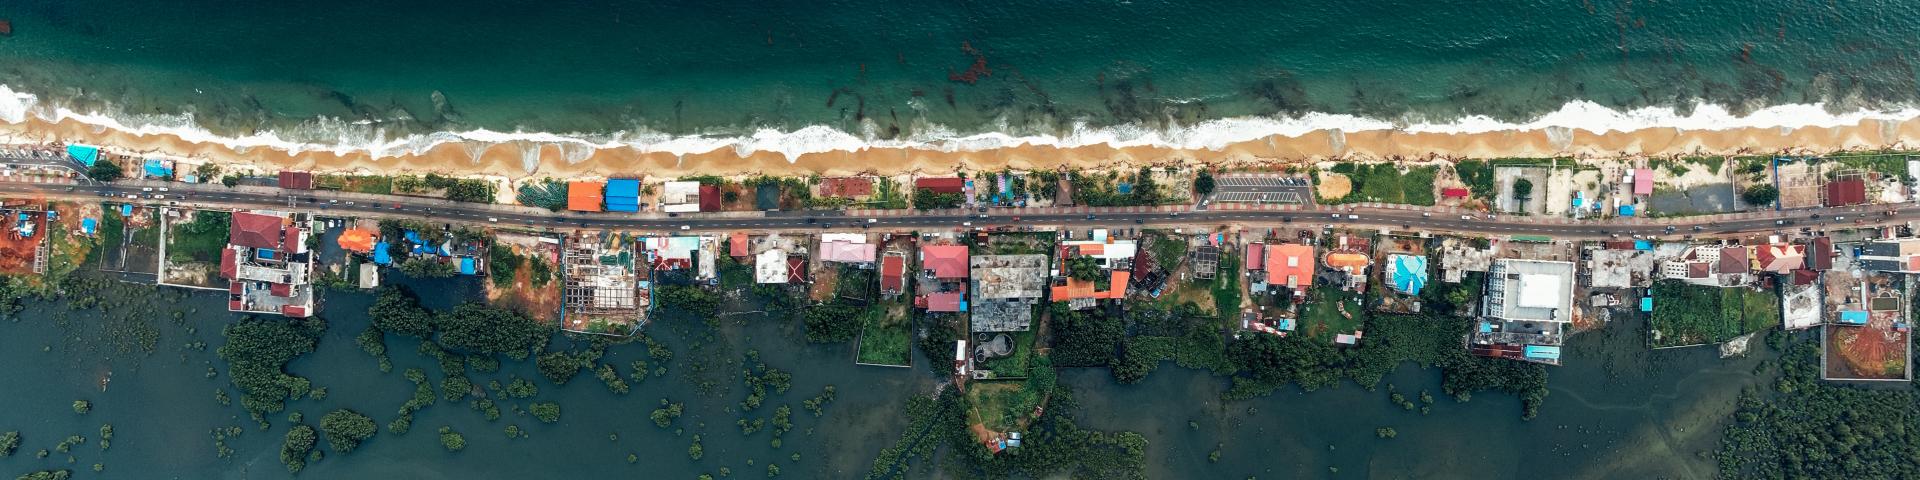 Aerial view of a village on a shoreline